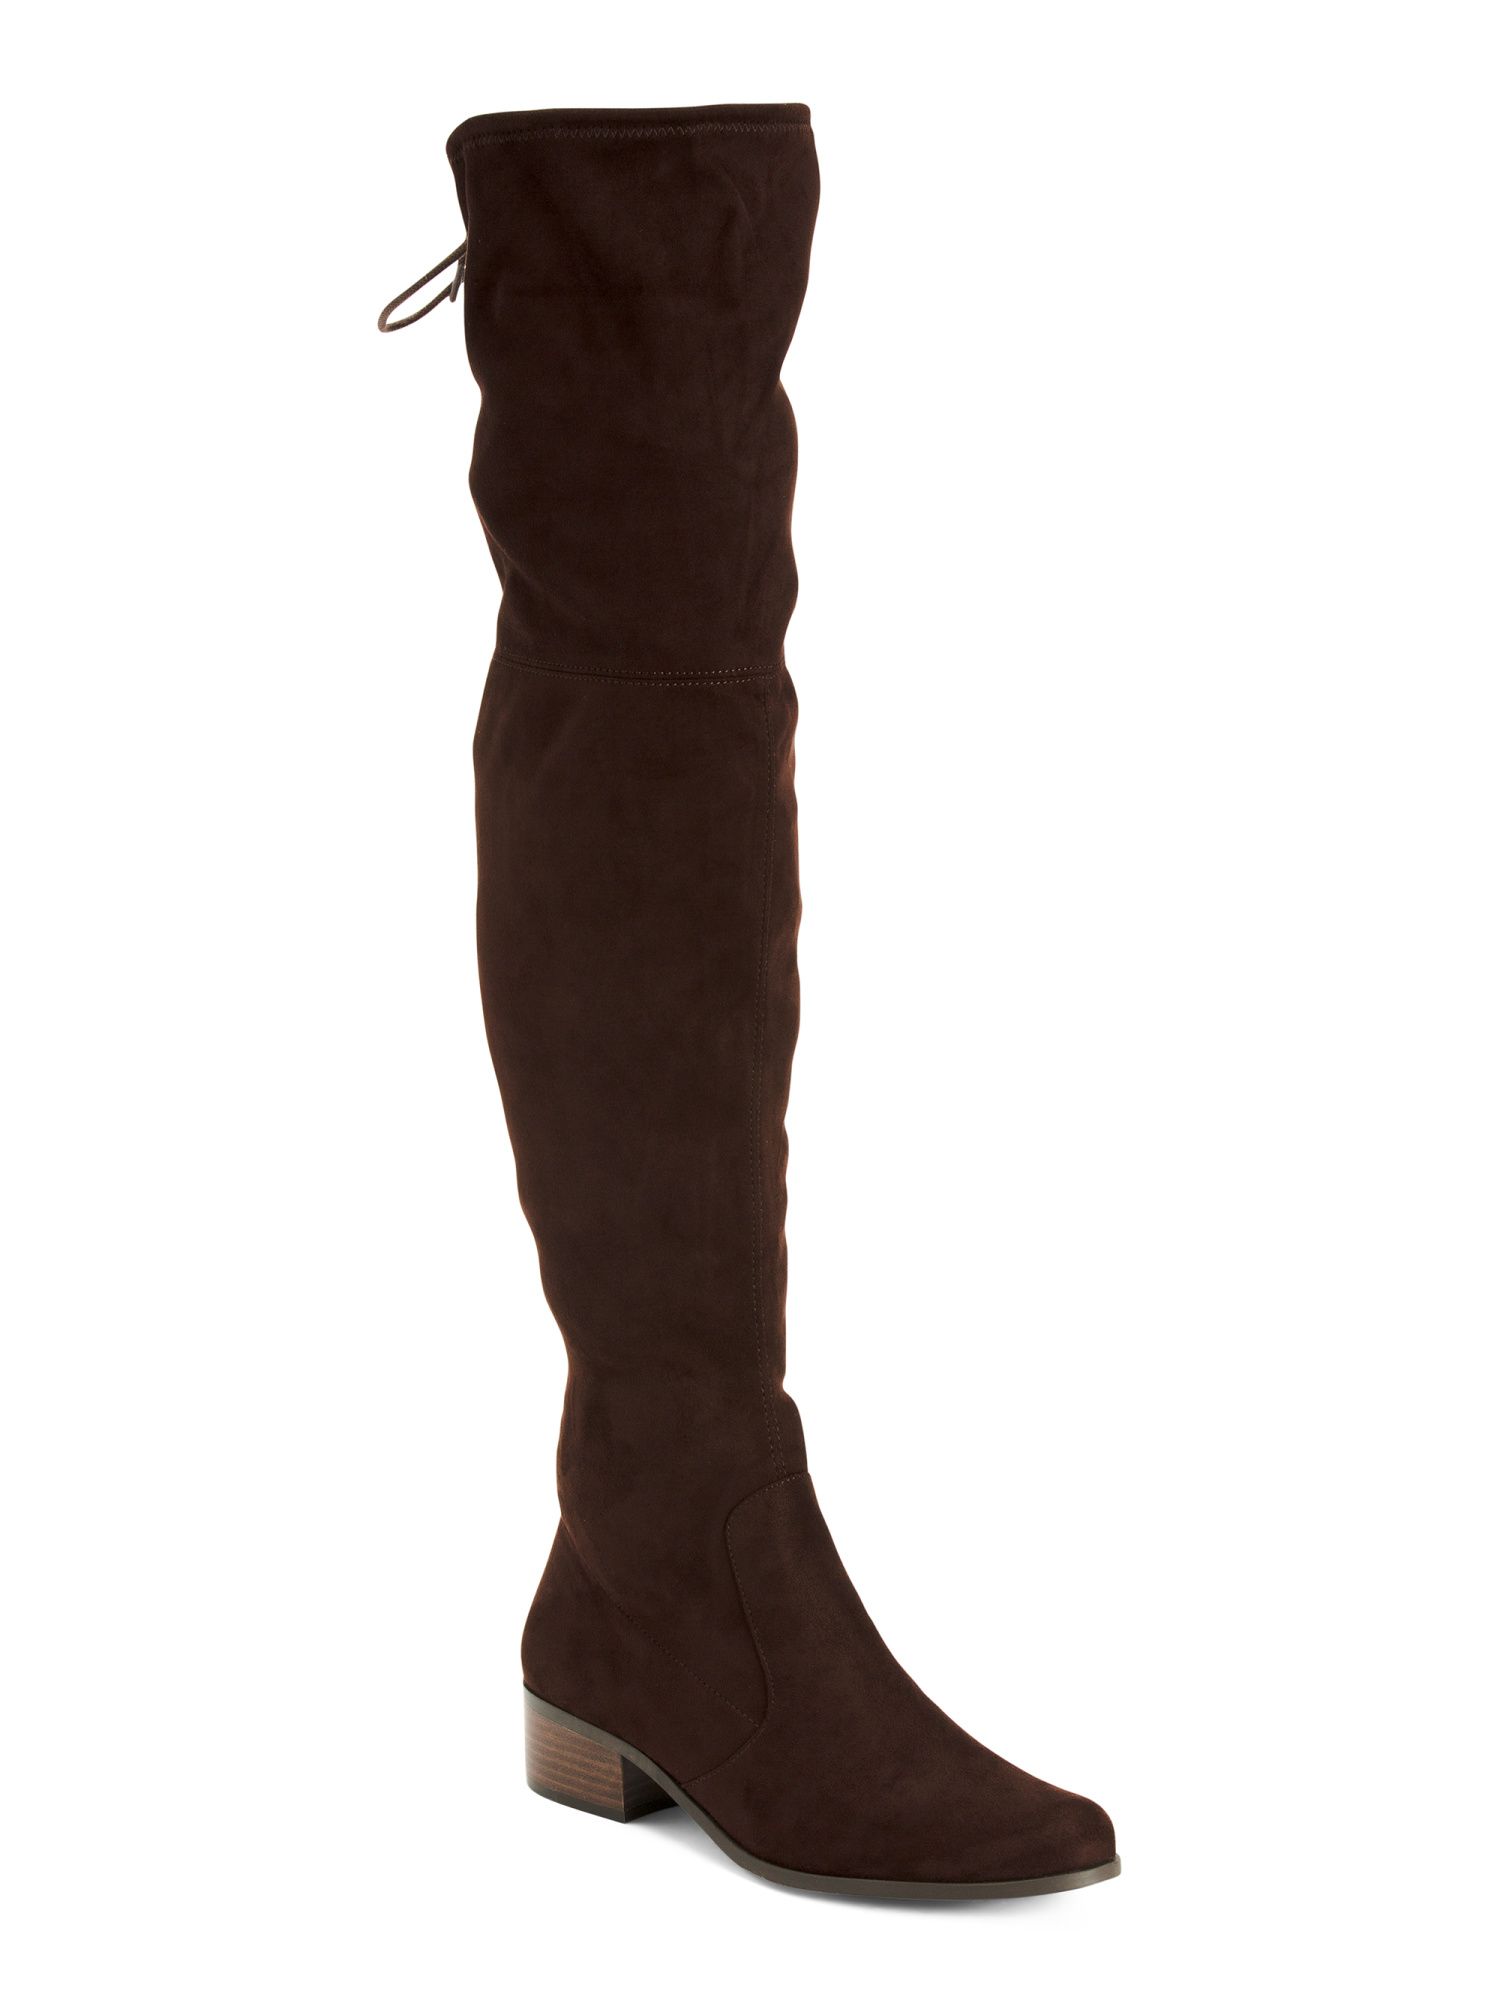 Stretch Over The Knee Boots | TJ Maxx